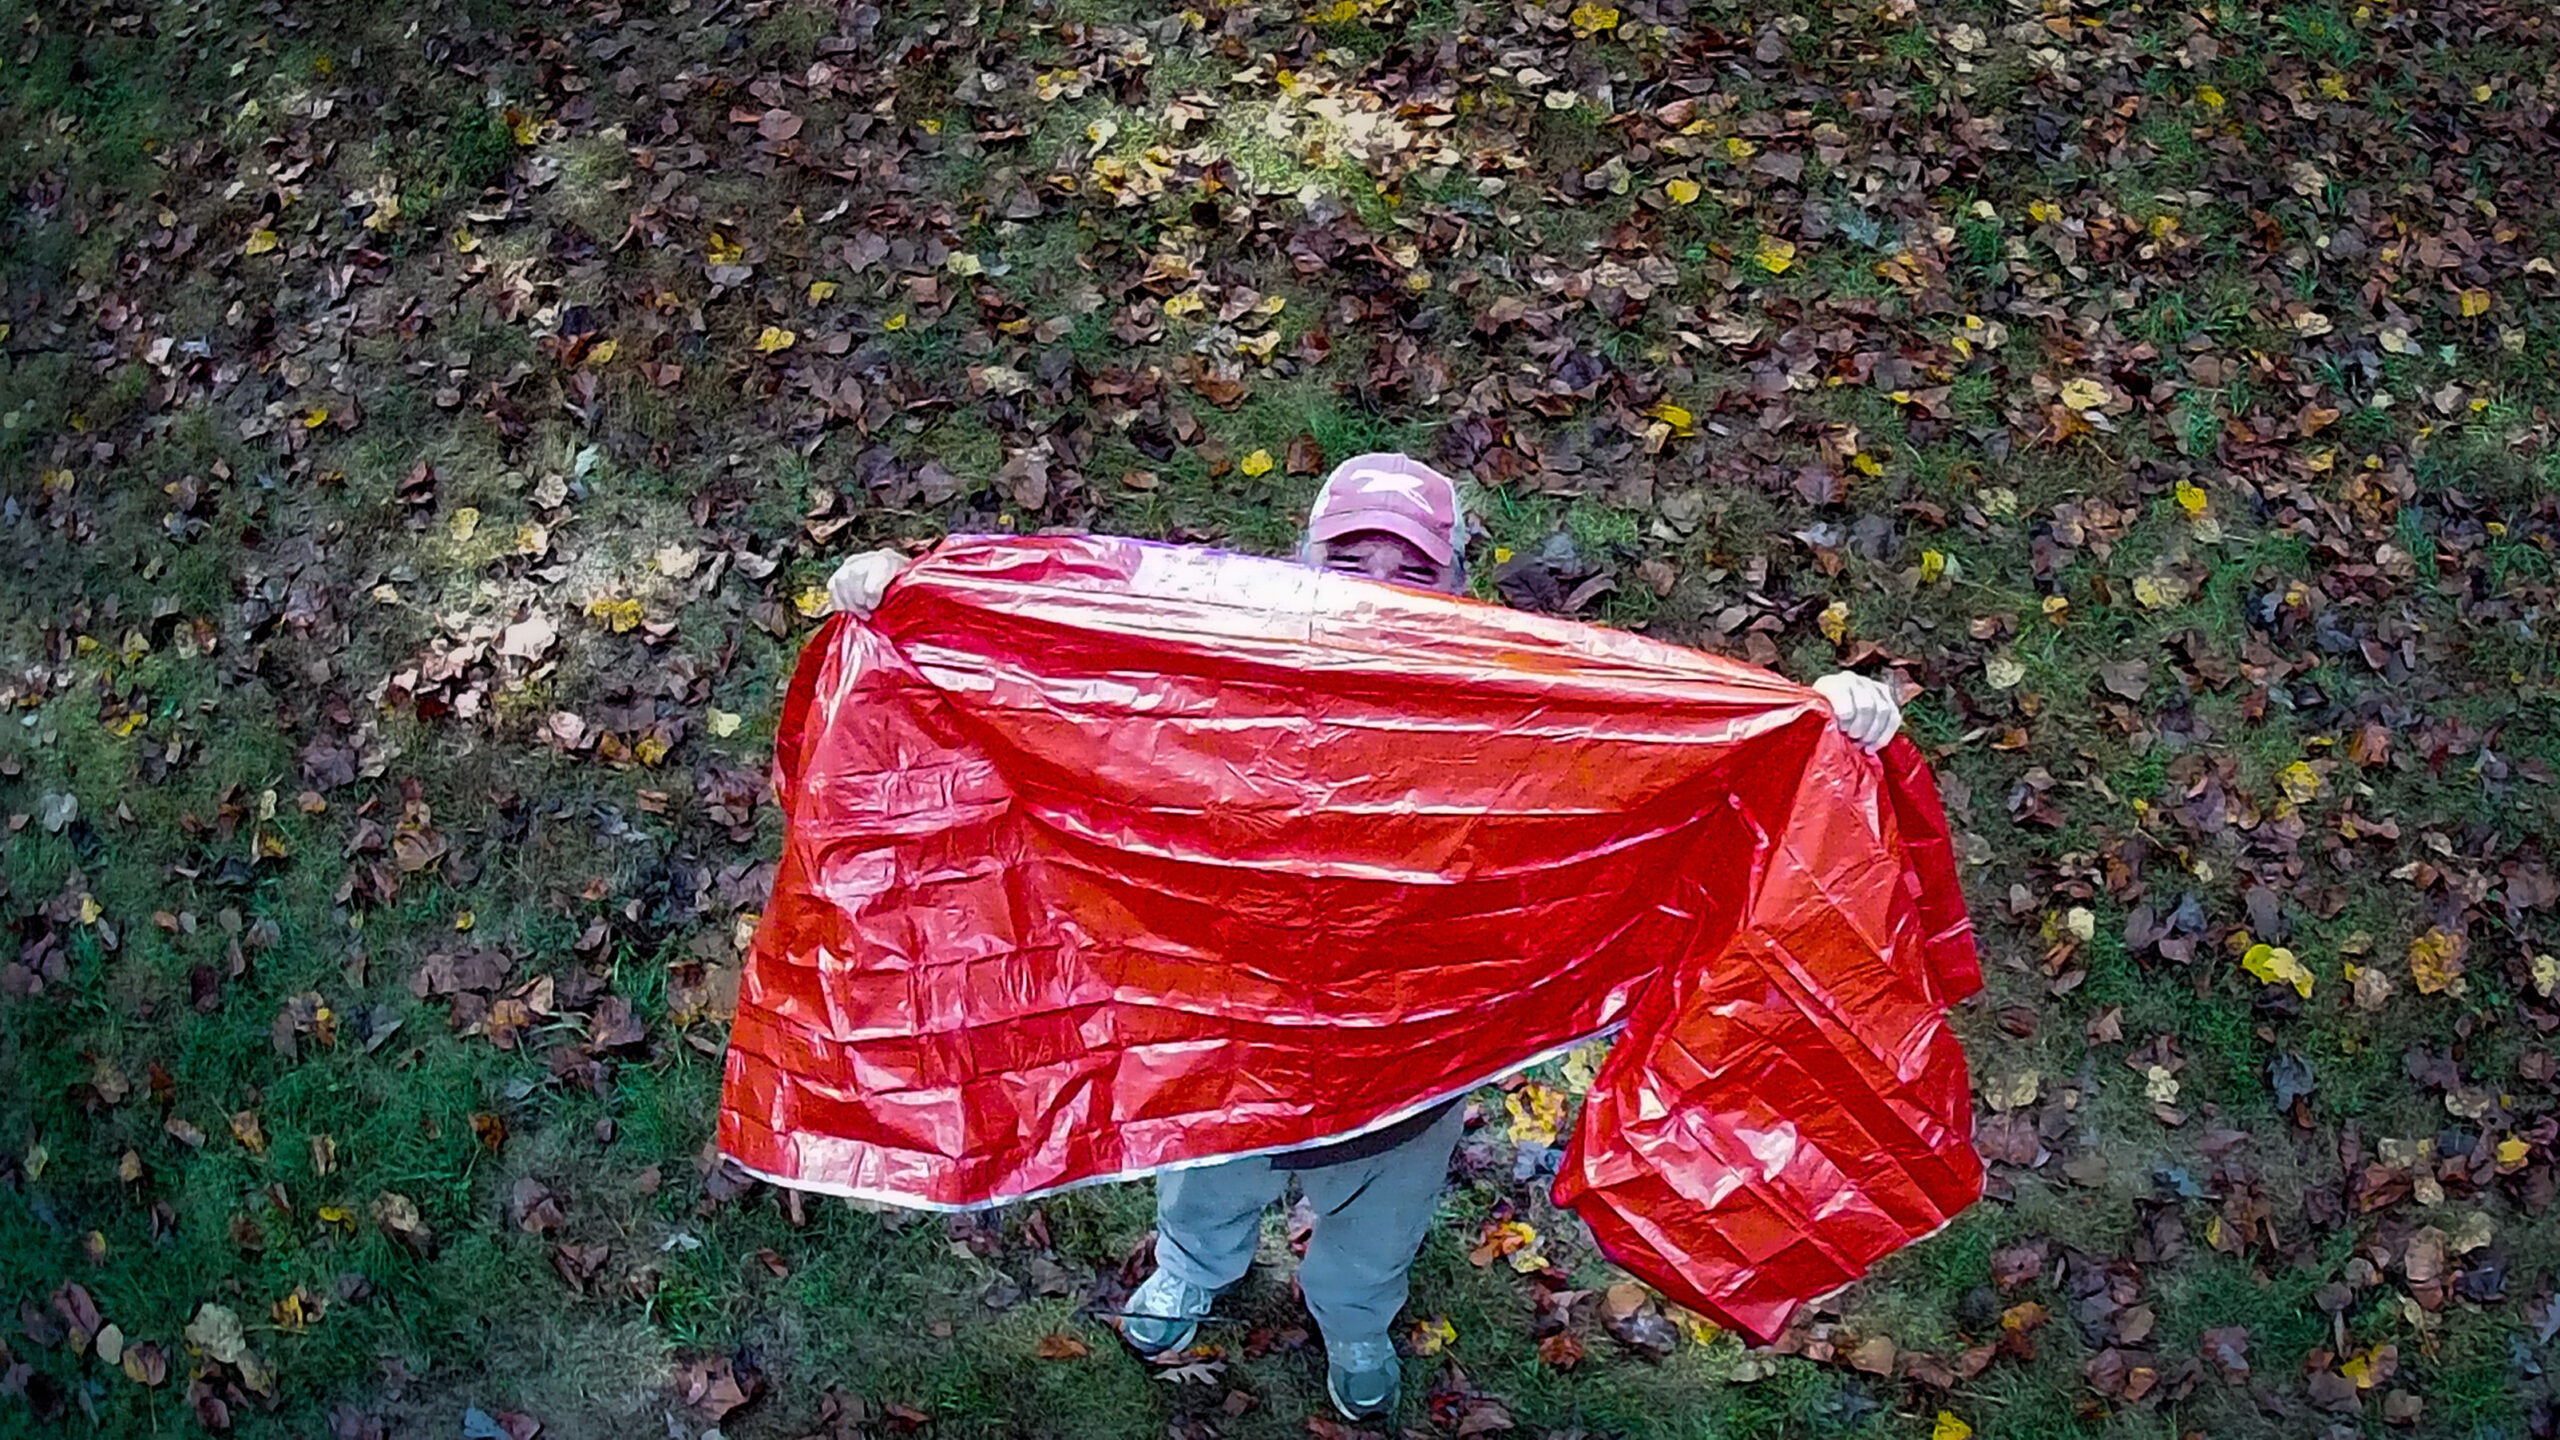 Man uses a space blanket to signal for help in the woods